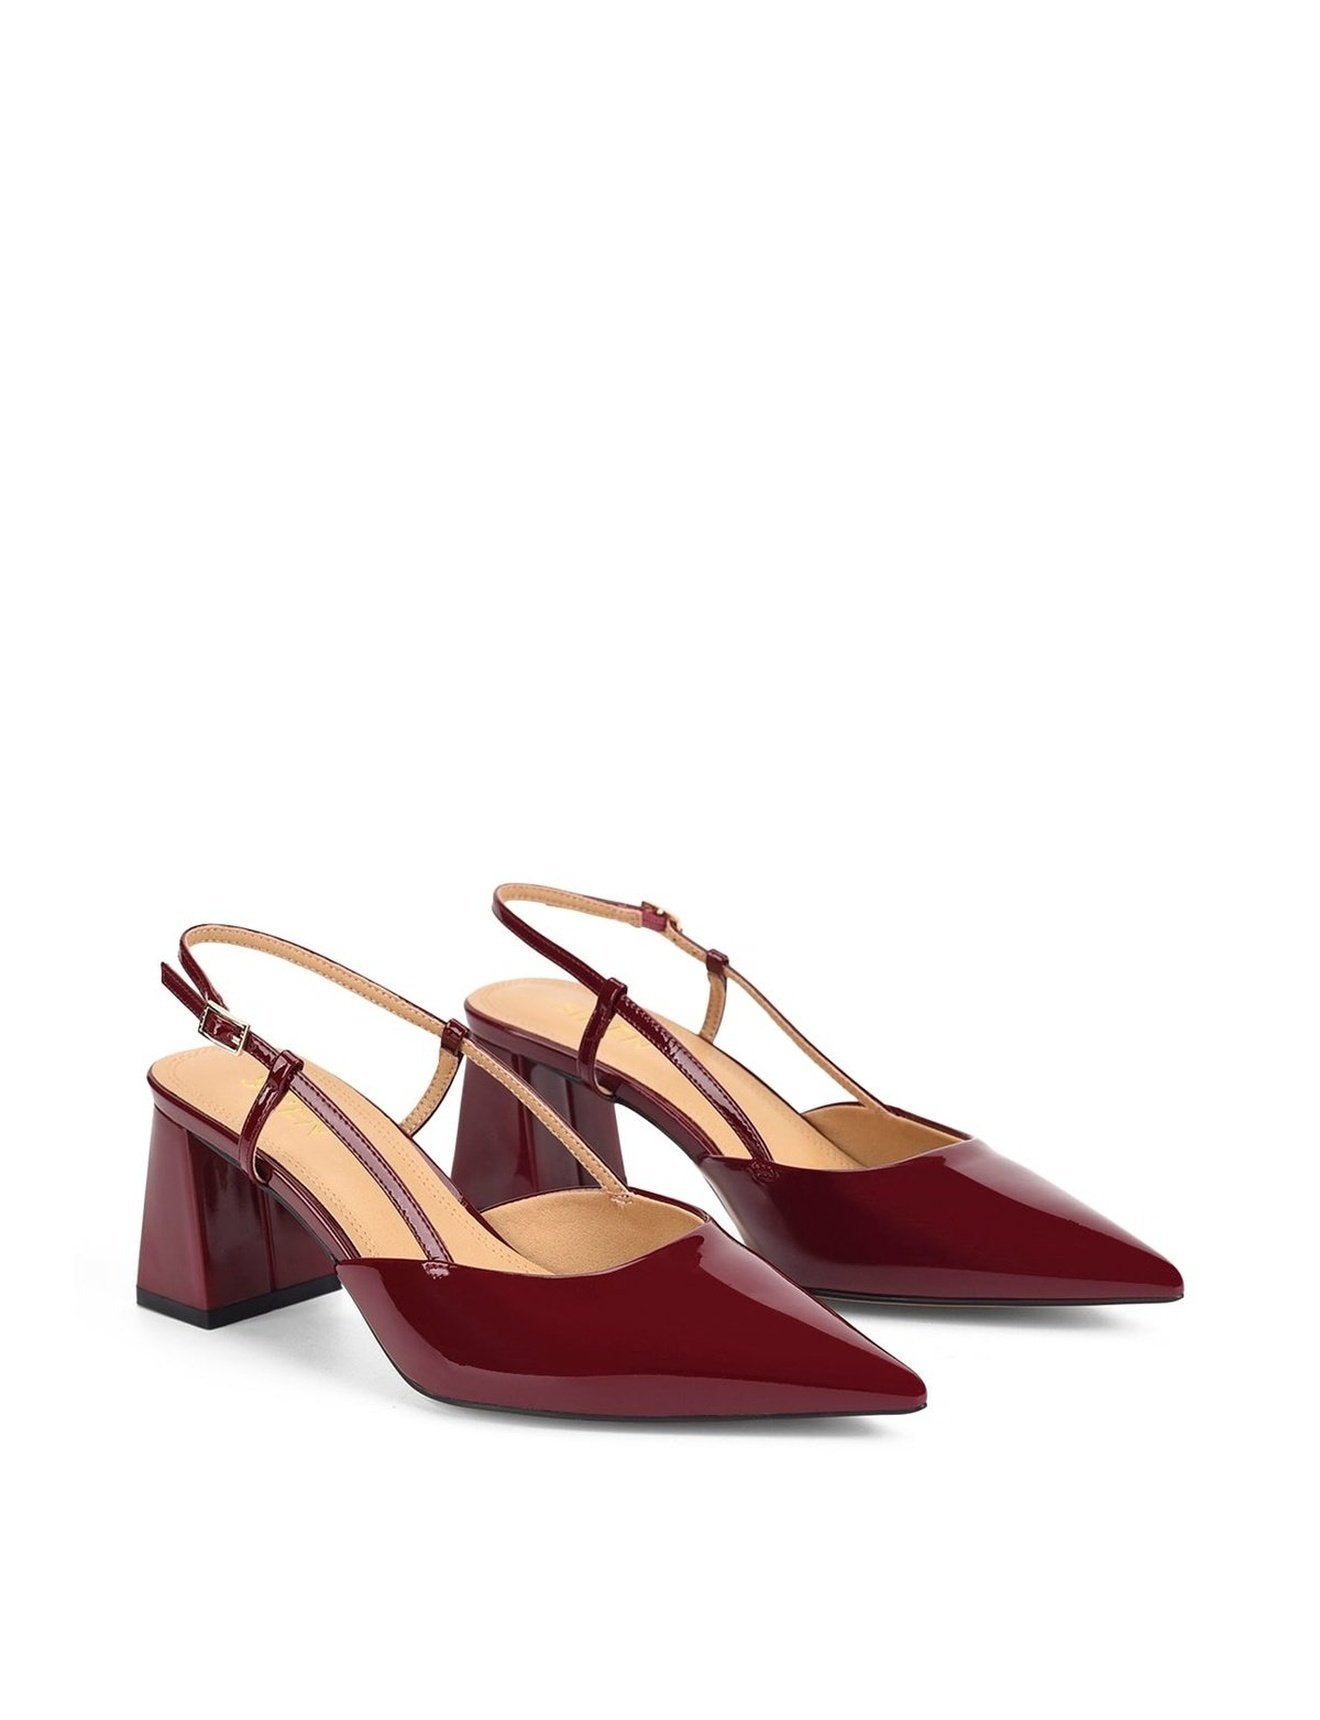 Women's block heel slingback with pointed toe in wine patent leather